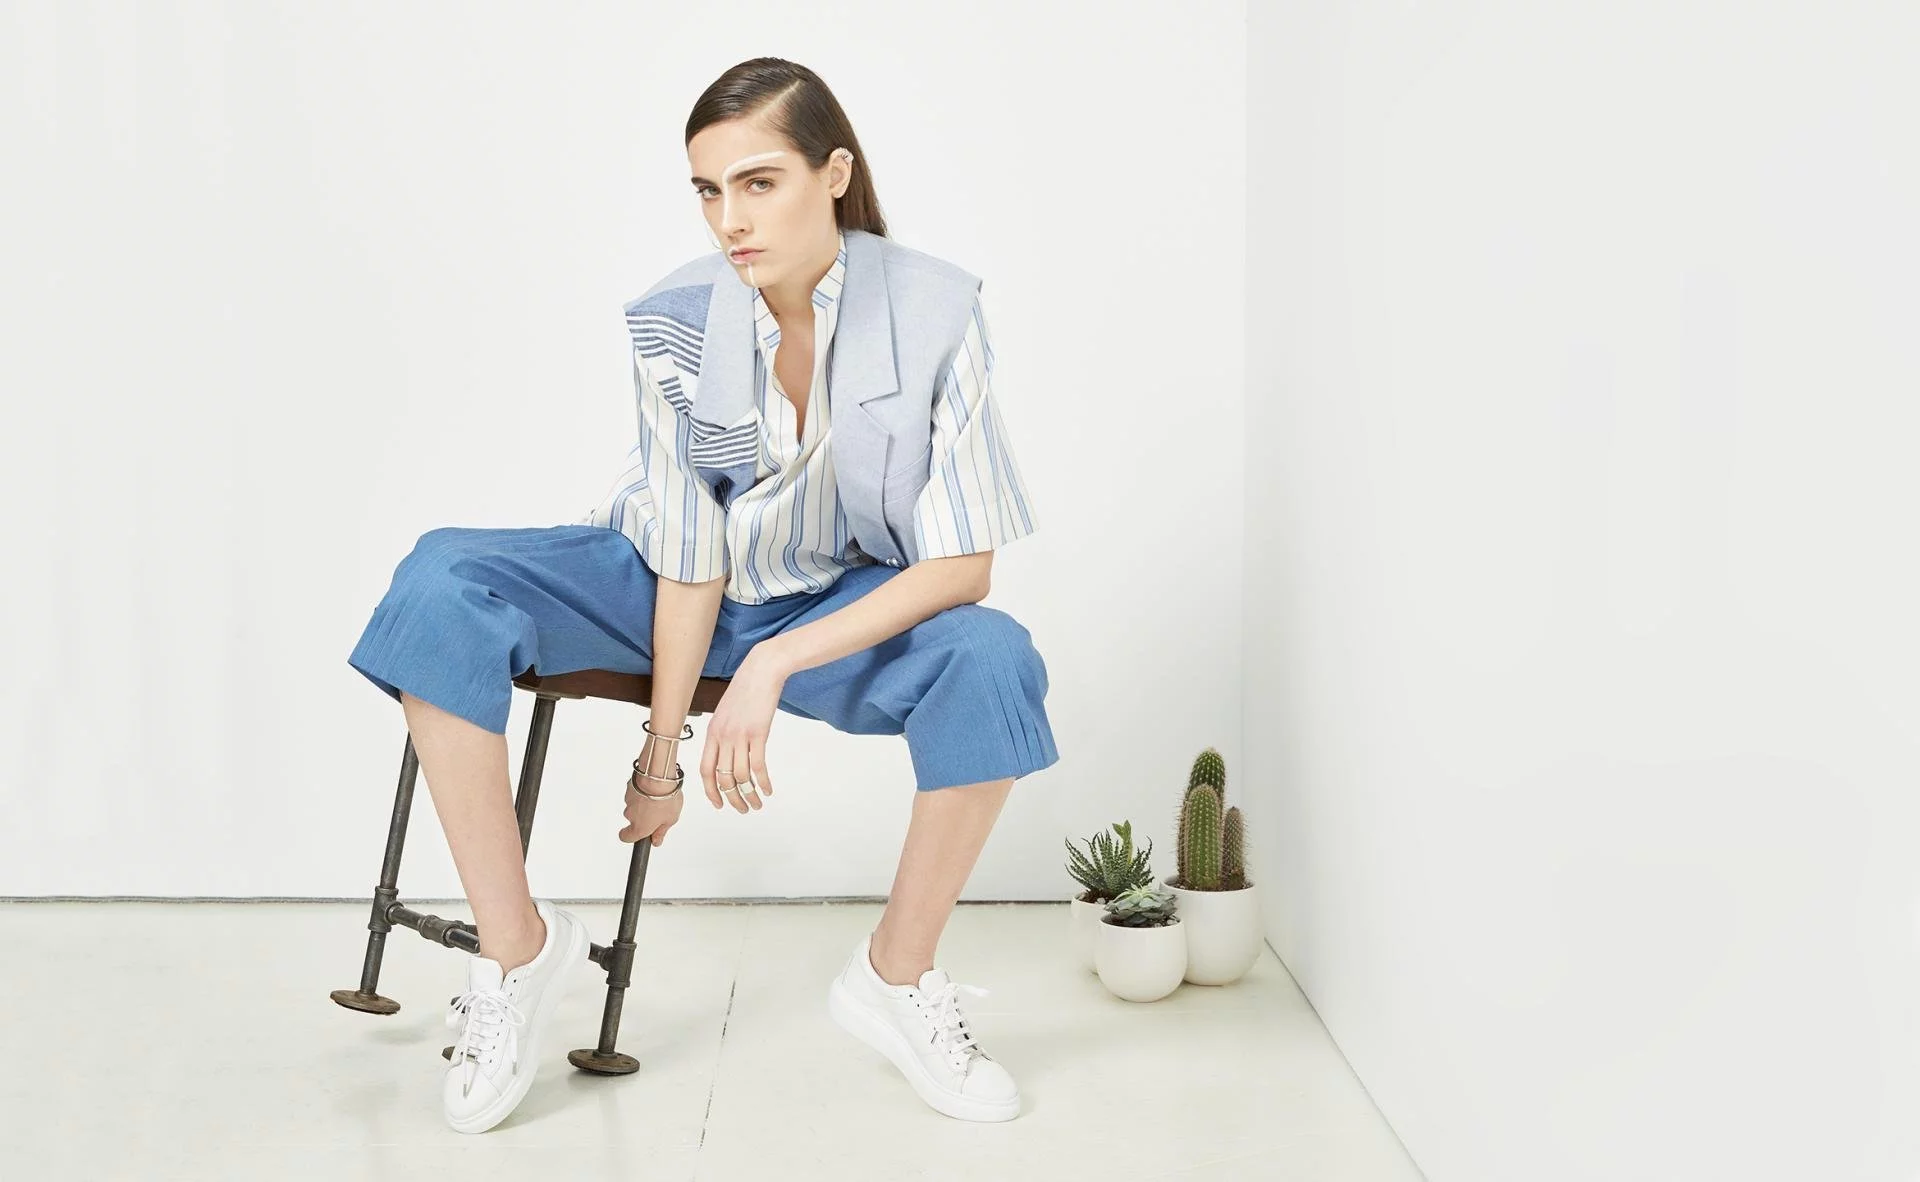 Let's discover Anissa Aida's new SS 2019 collection